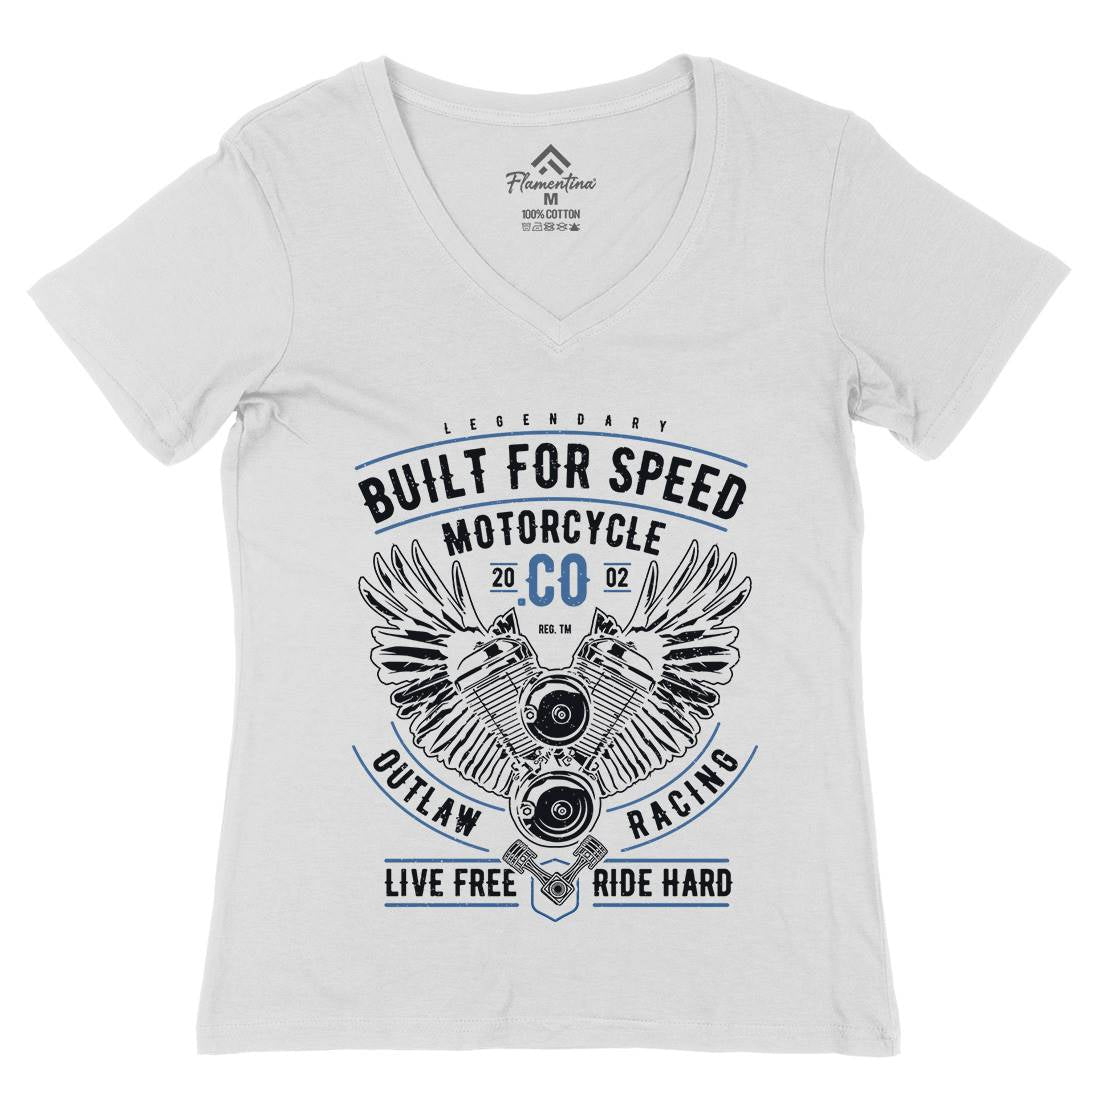 Built For Speed Womens Organic V-Neck T-Shirt Motorcycles A628